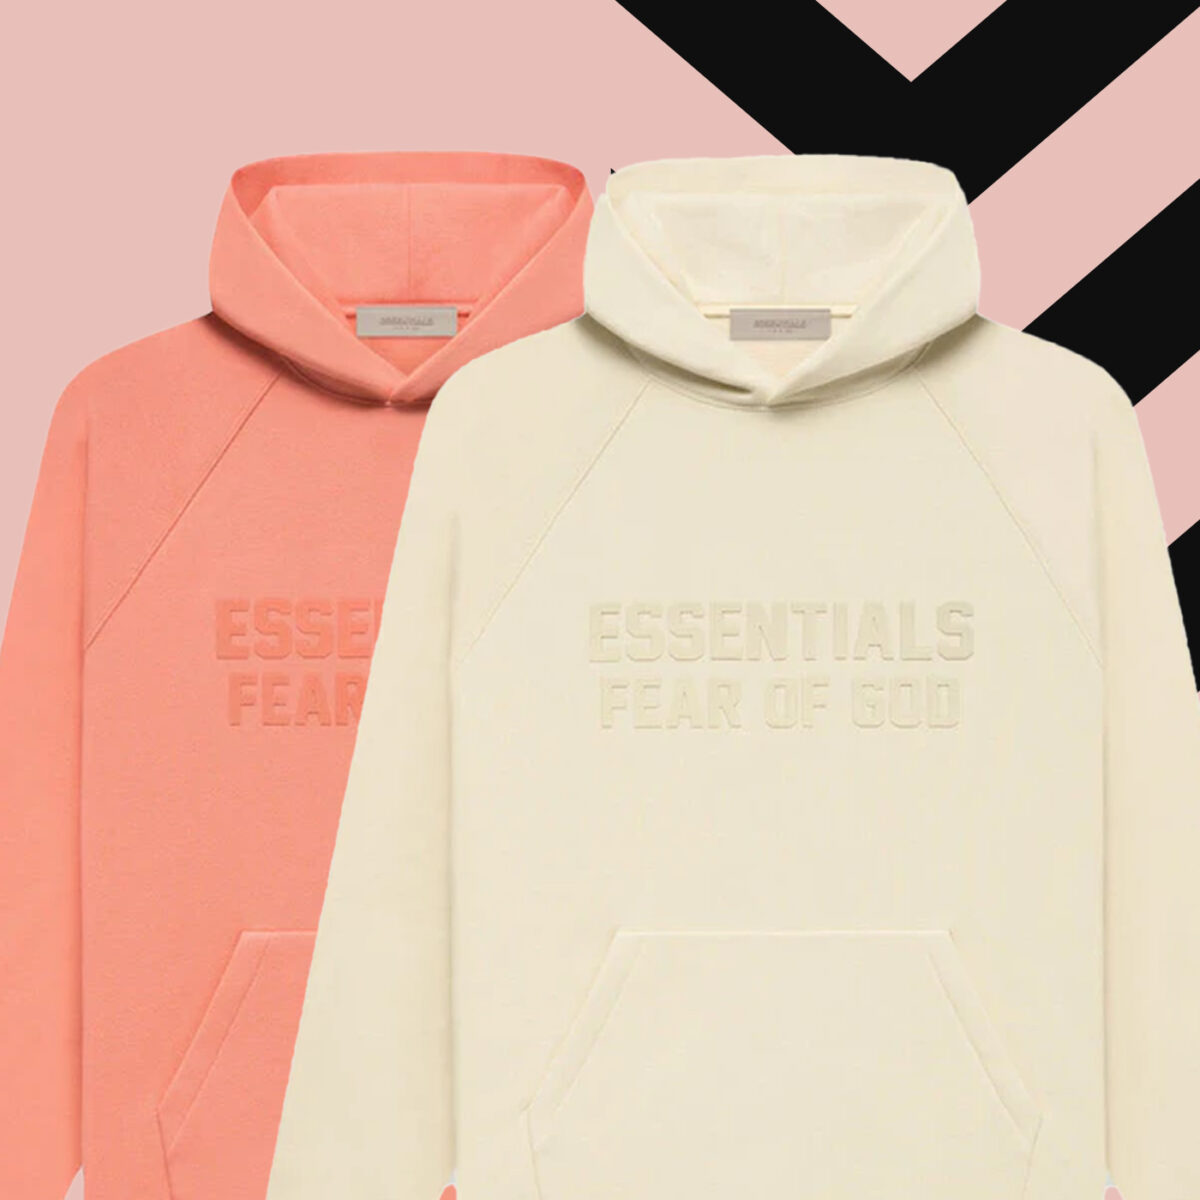 Essentials Hoodies You Can Choose for Winters